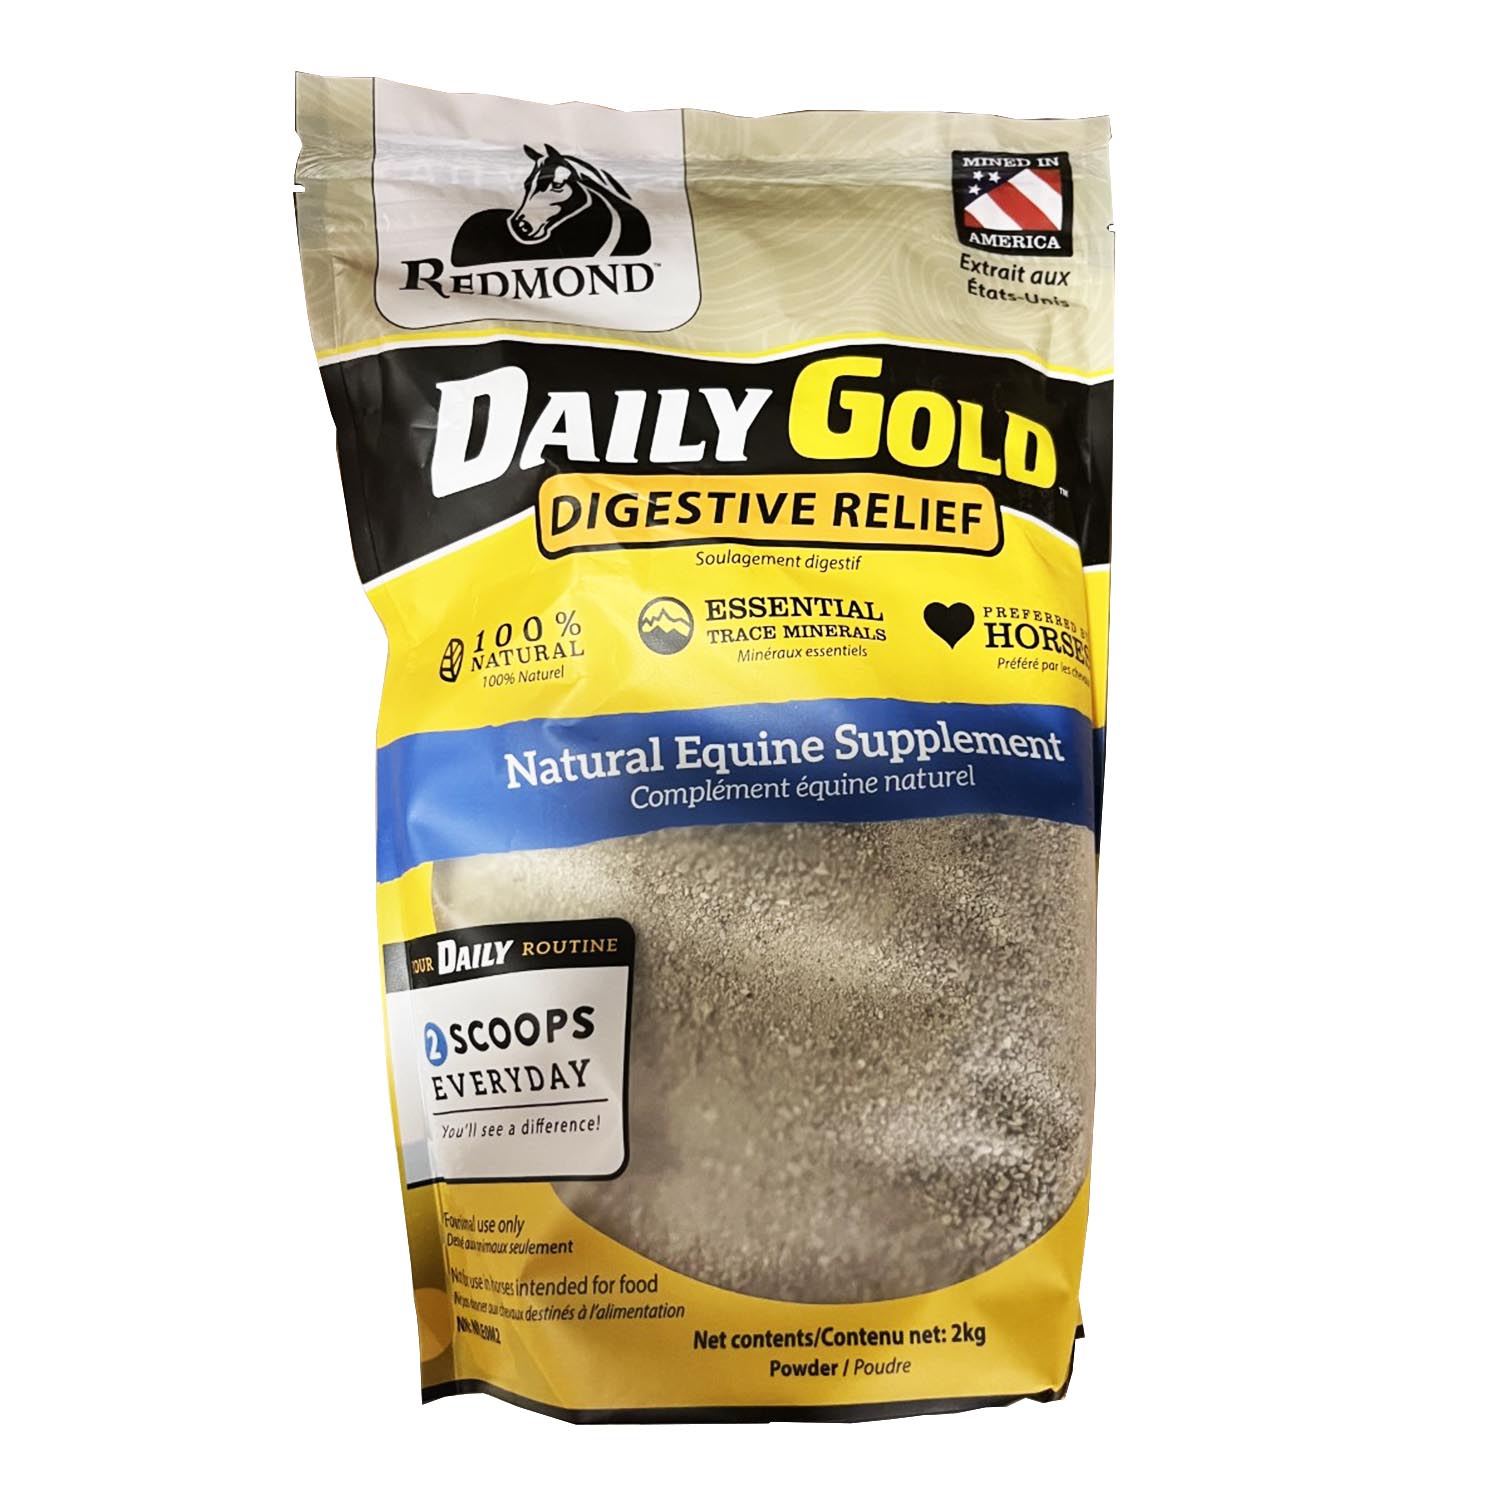 Daily Gold Digestive Relief